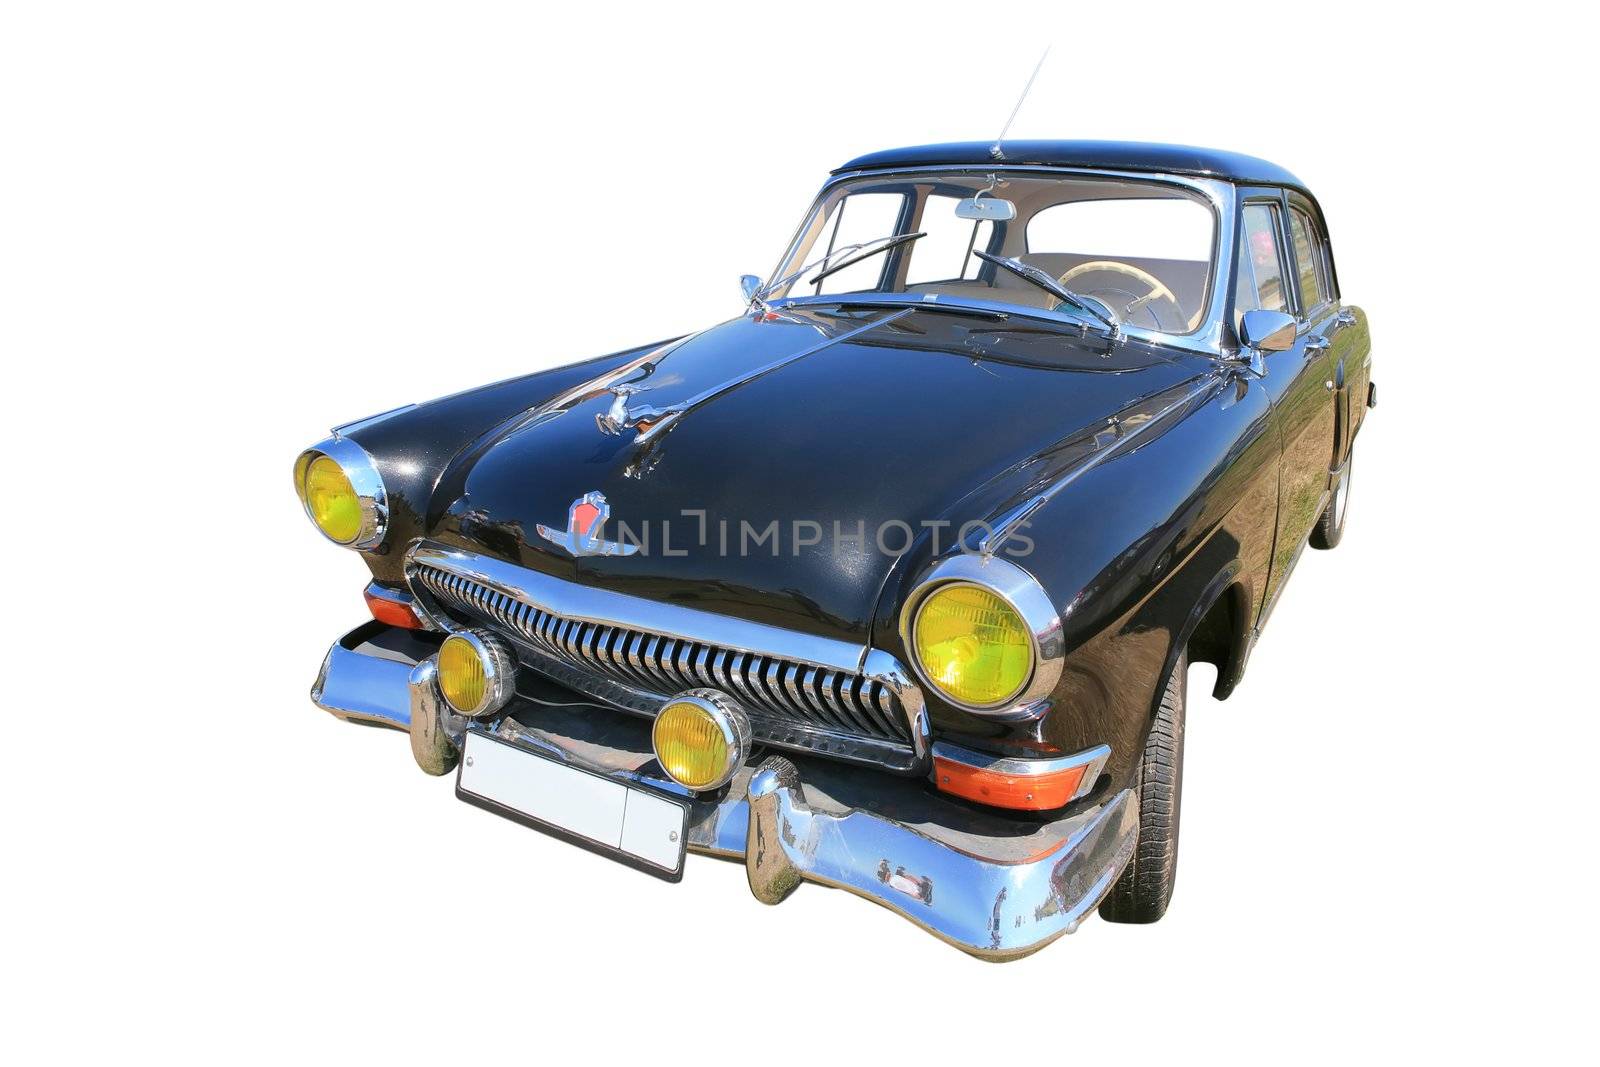 Legendary russian car 60-70-h, black and shining, Volga GAS - 21, for editorial use